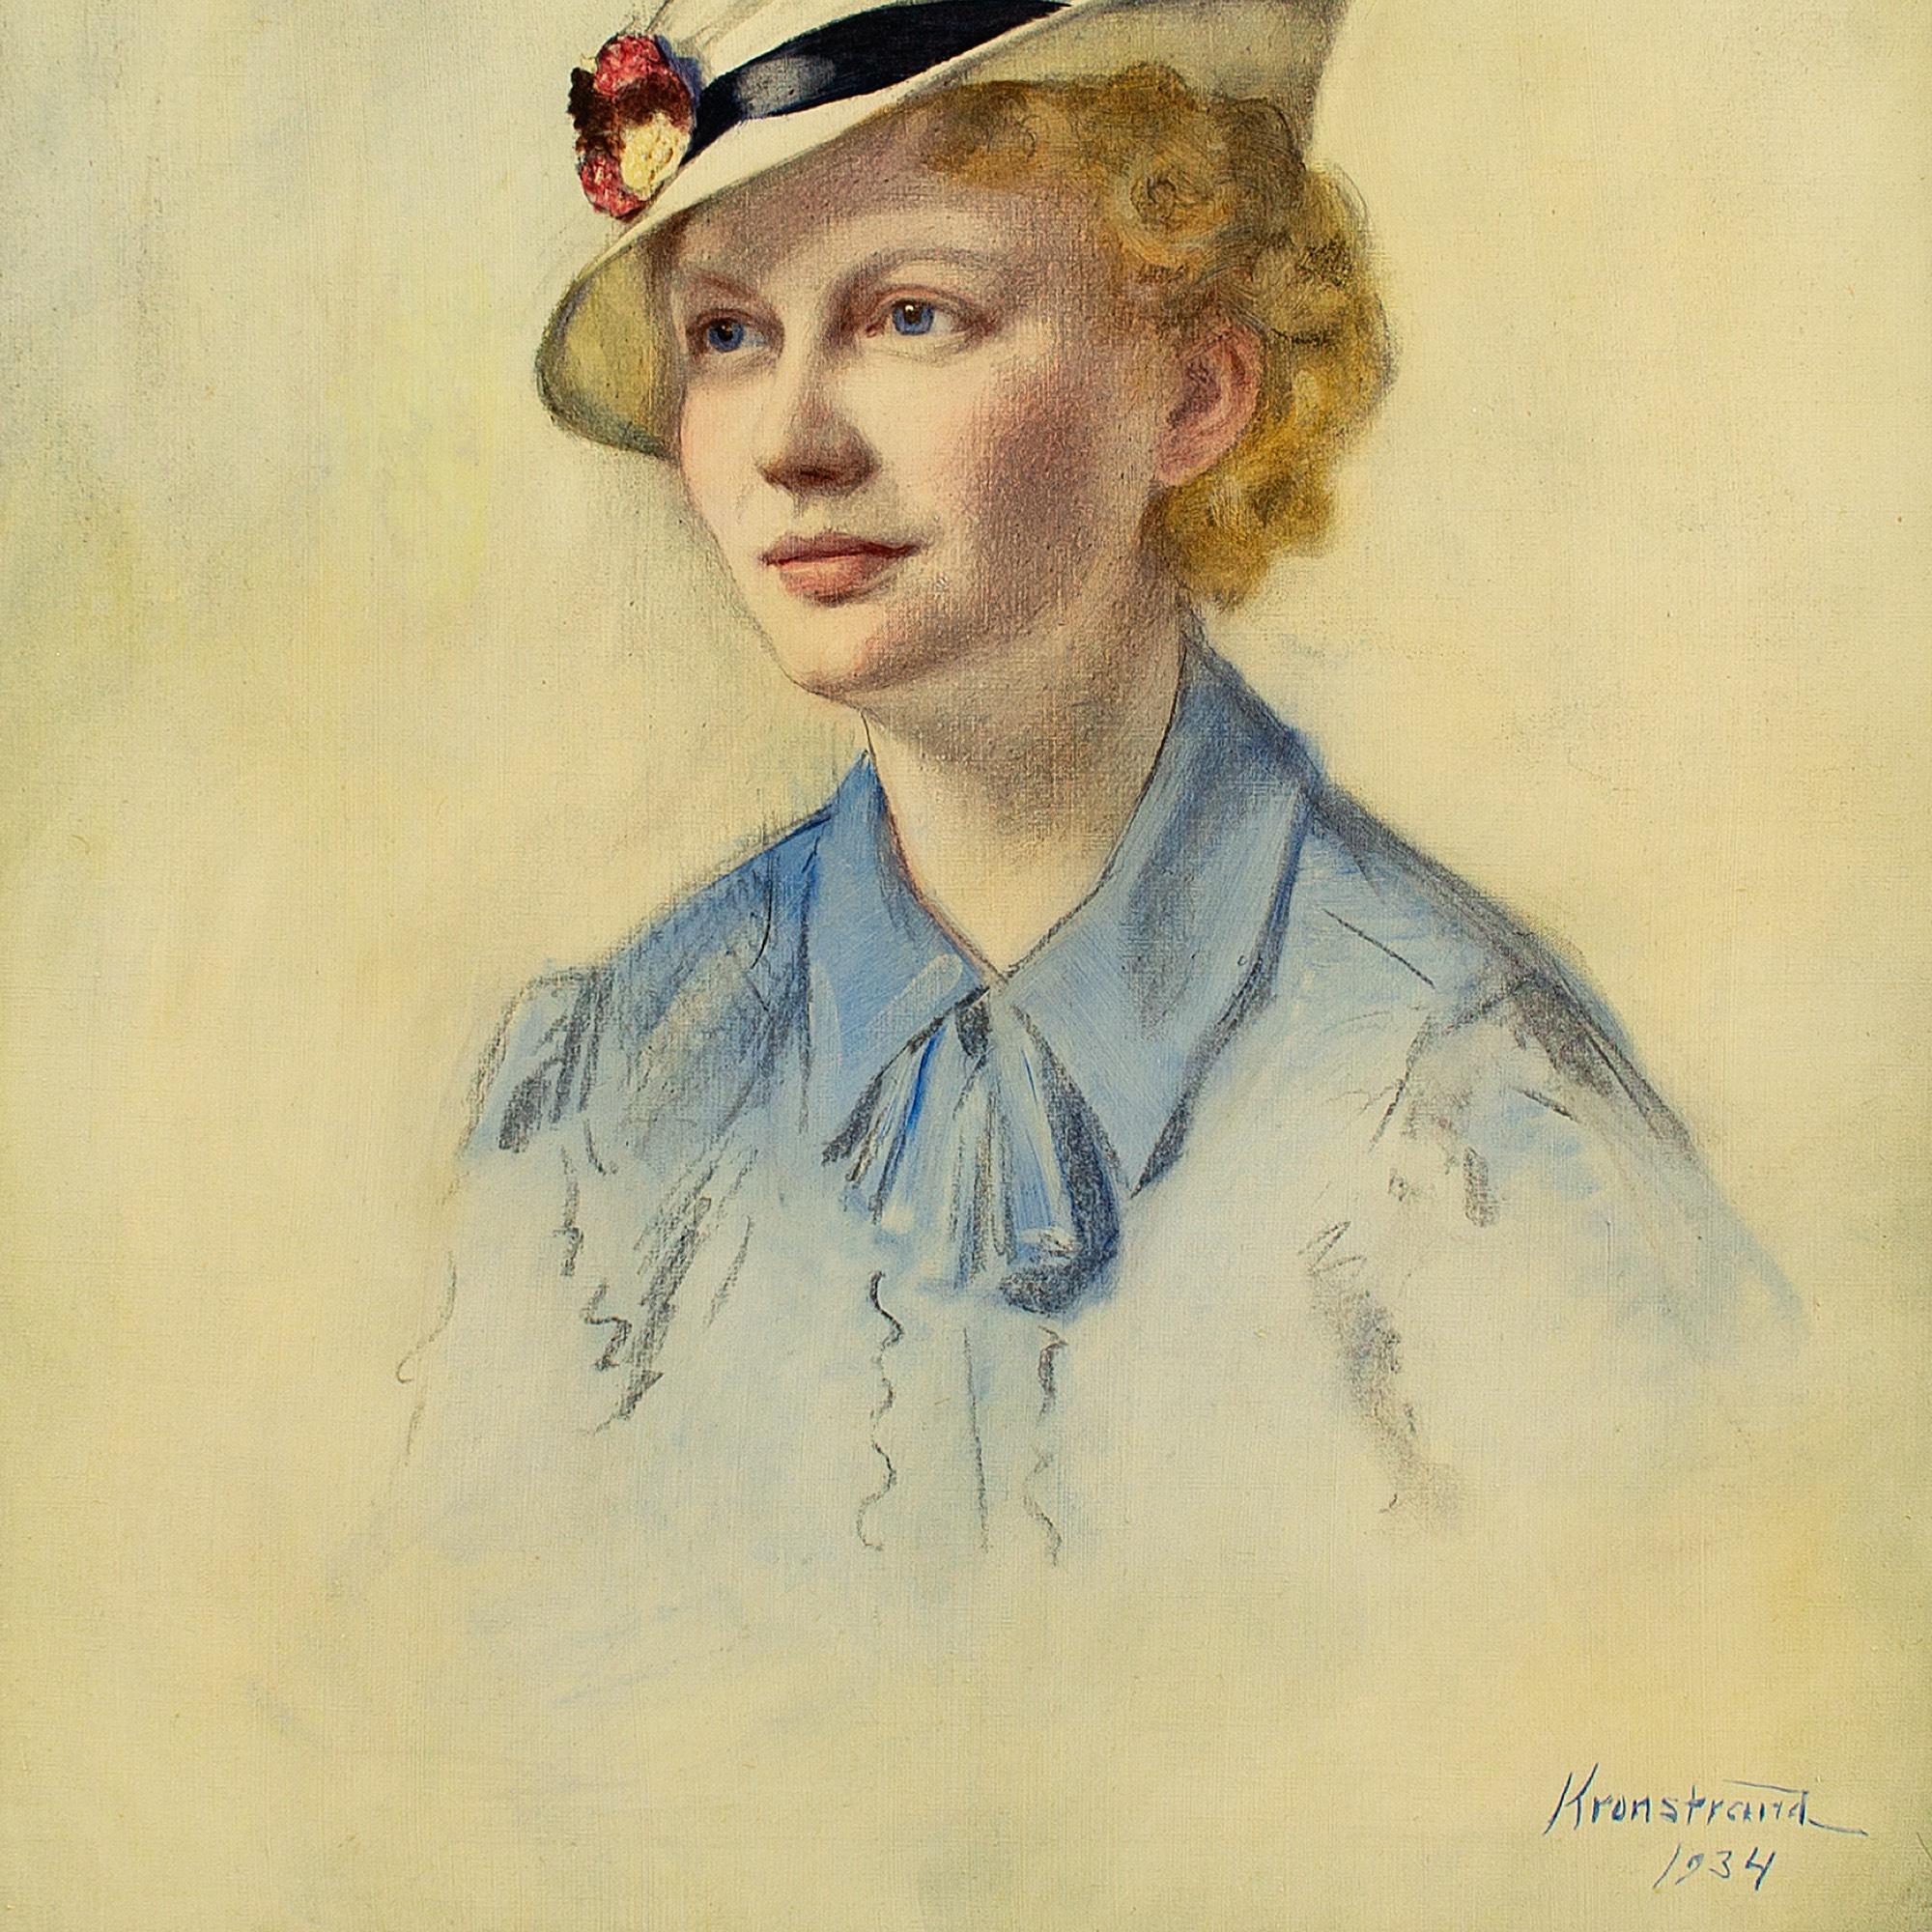 This charming portrait by Bror Kronstrand (1875-1950) depicts Brita Söderberg (nee Browall) wearing a light blue blouse with a white hat, ribbon and flower. She was 20 at the time.

Kronstrand was a fascinating and well-travelled artist. When he